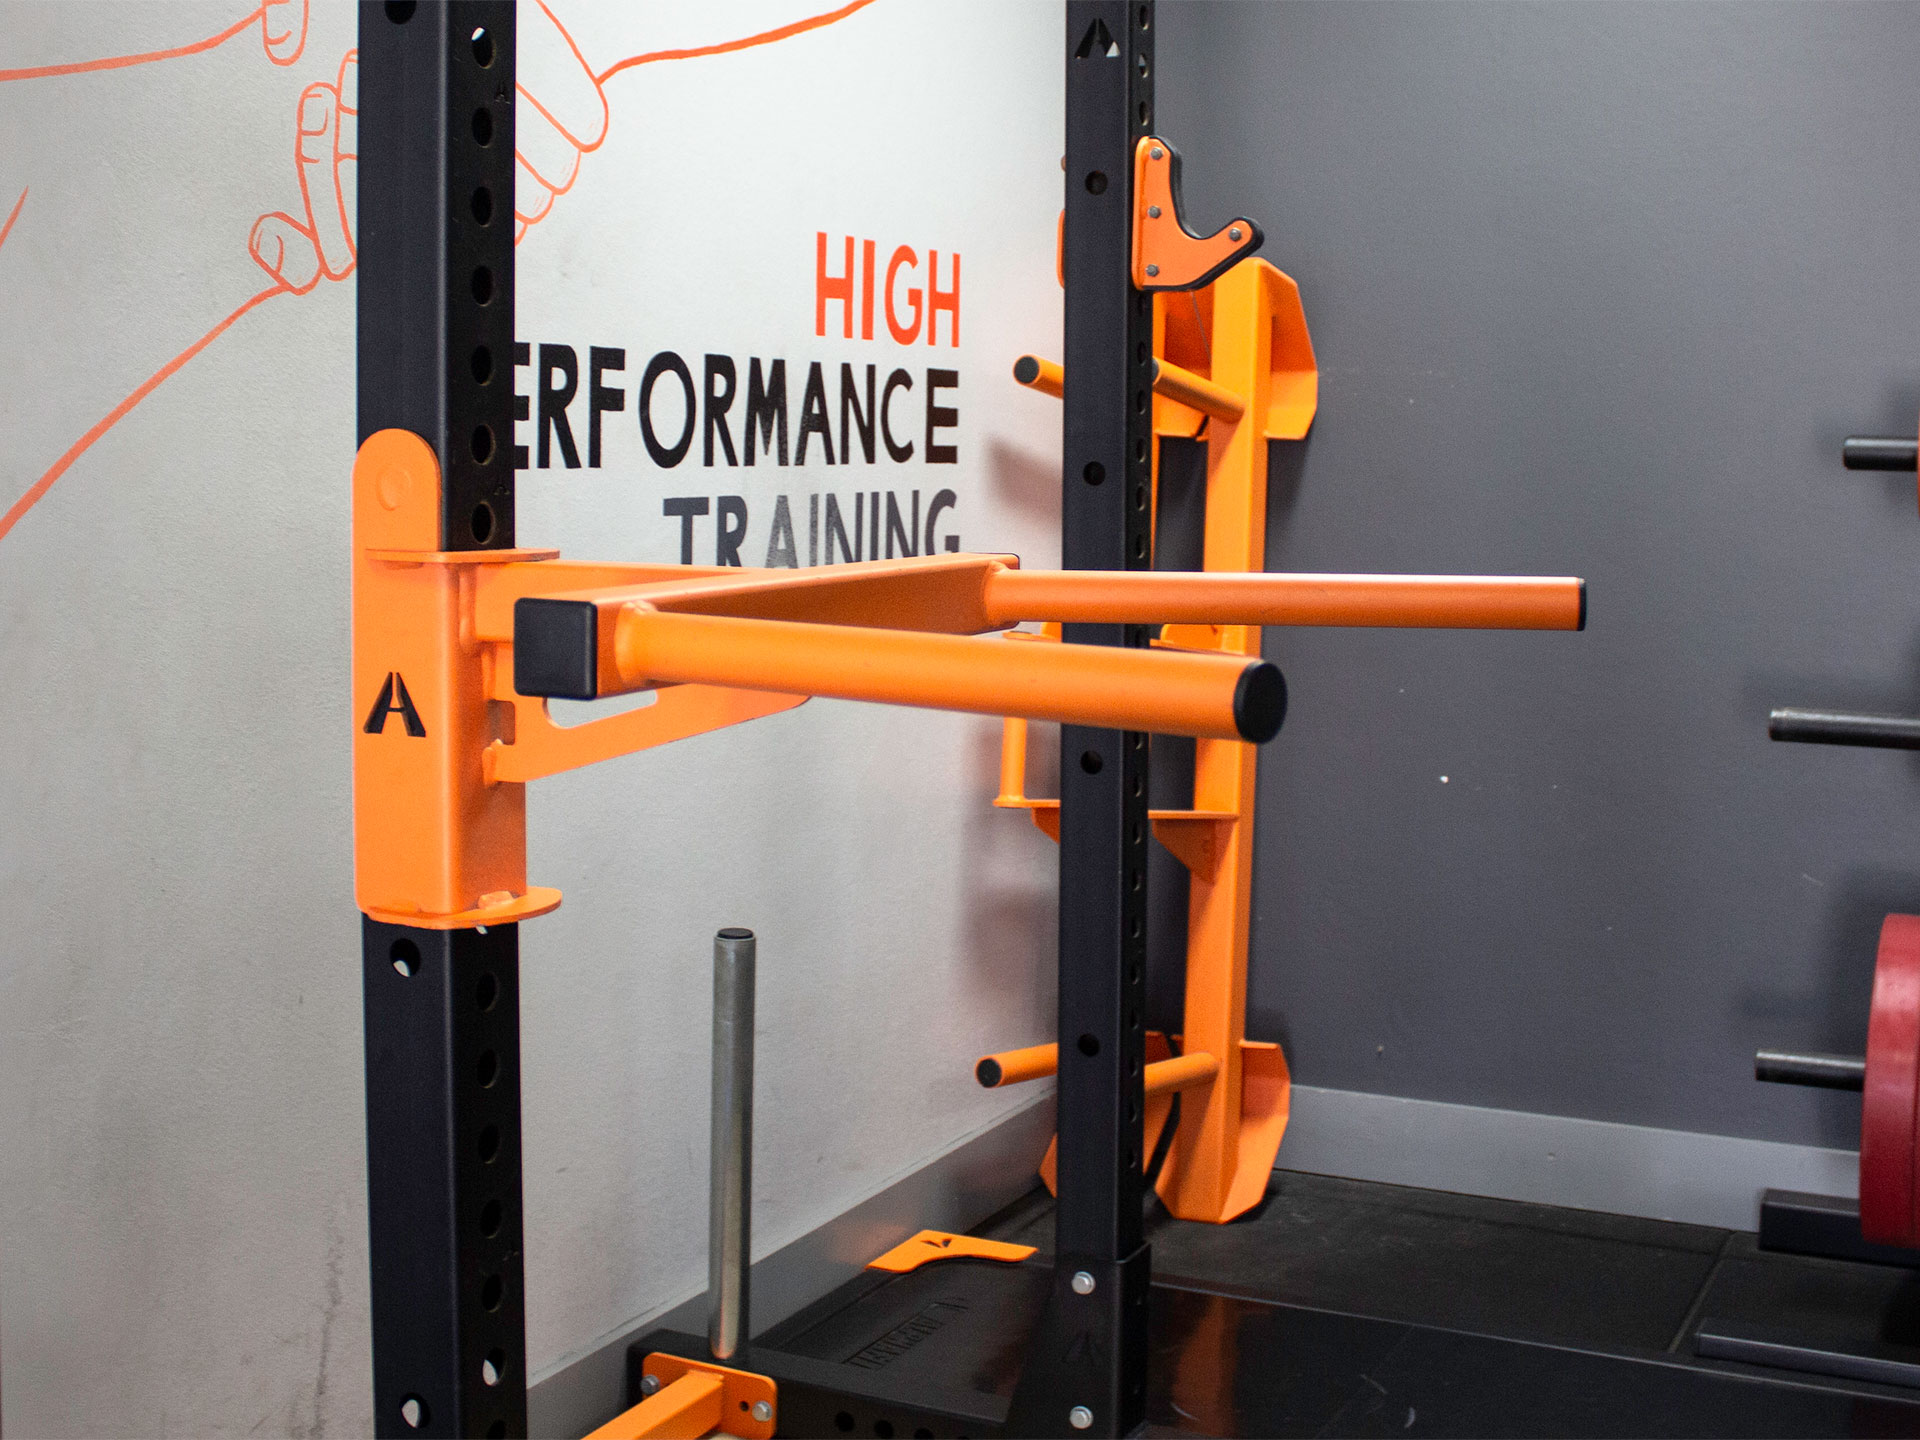 Body Coaching High Performance Strength and Conditioning Gym Fitout